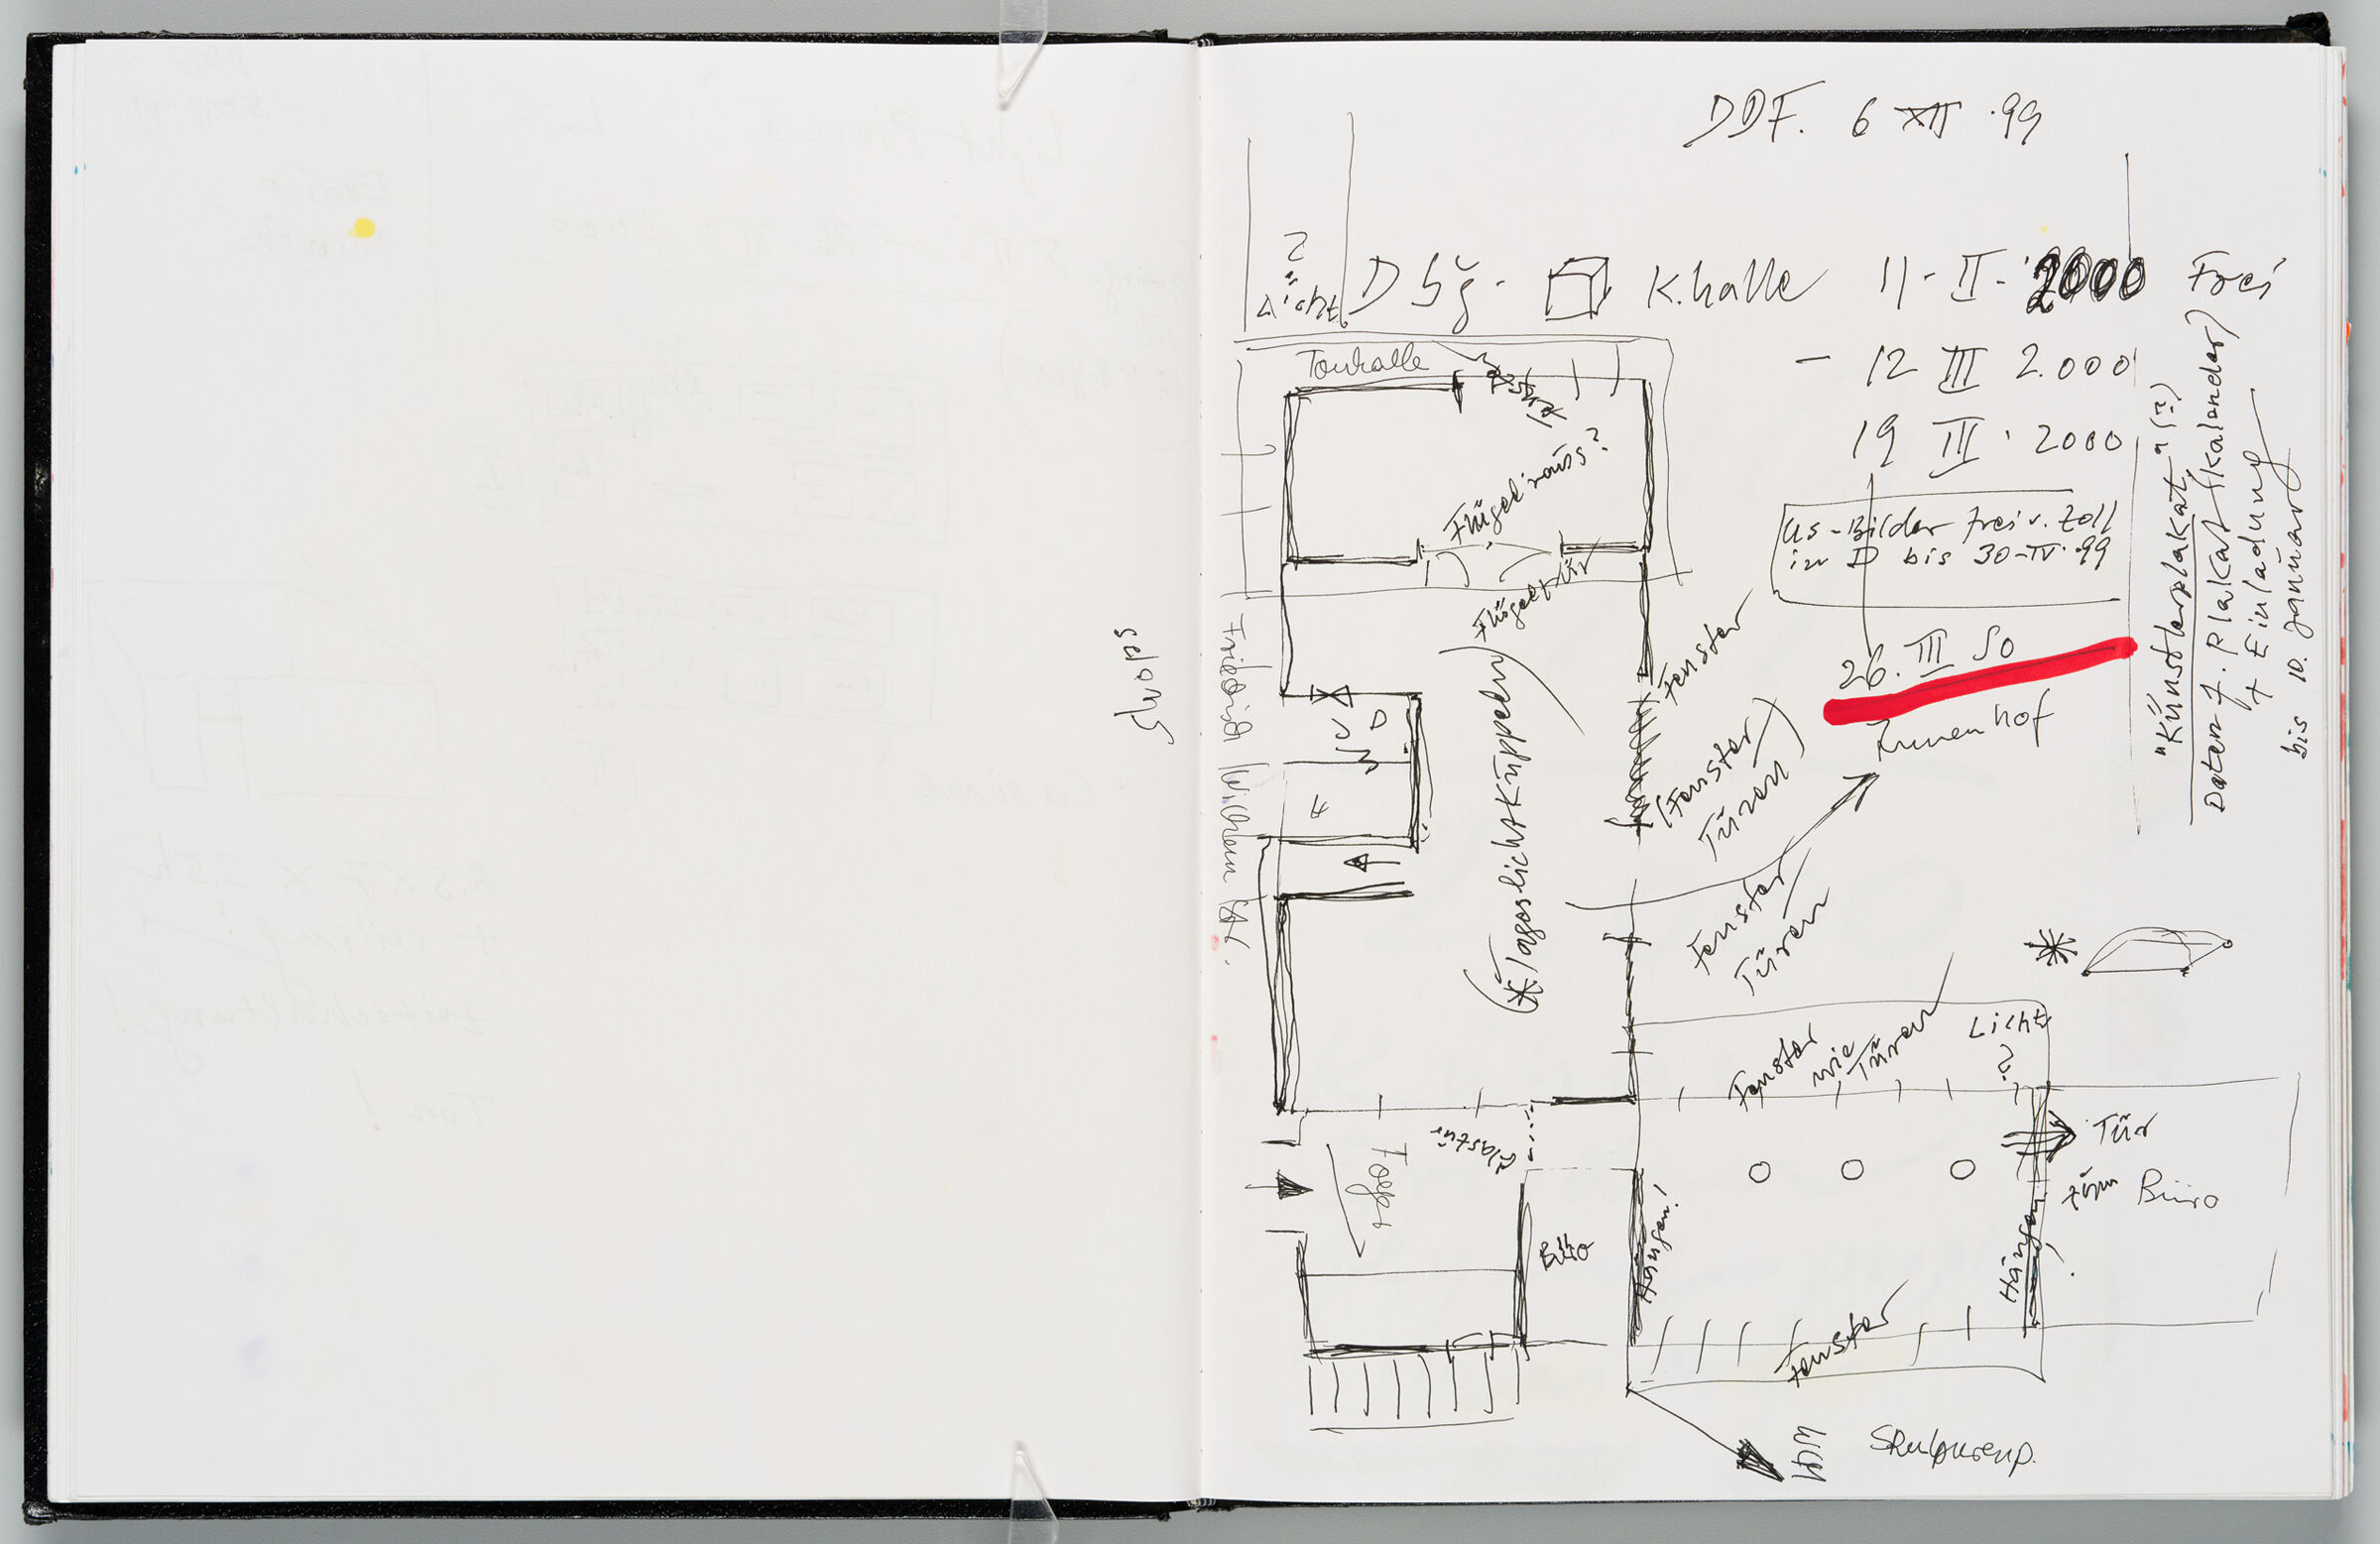 Untitled (Blank, Left Page); Untitled (Exhibition Layout For Duisburg Kunsthalle, Right Page)